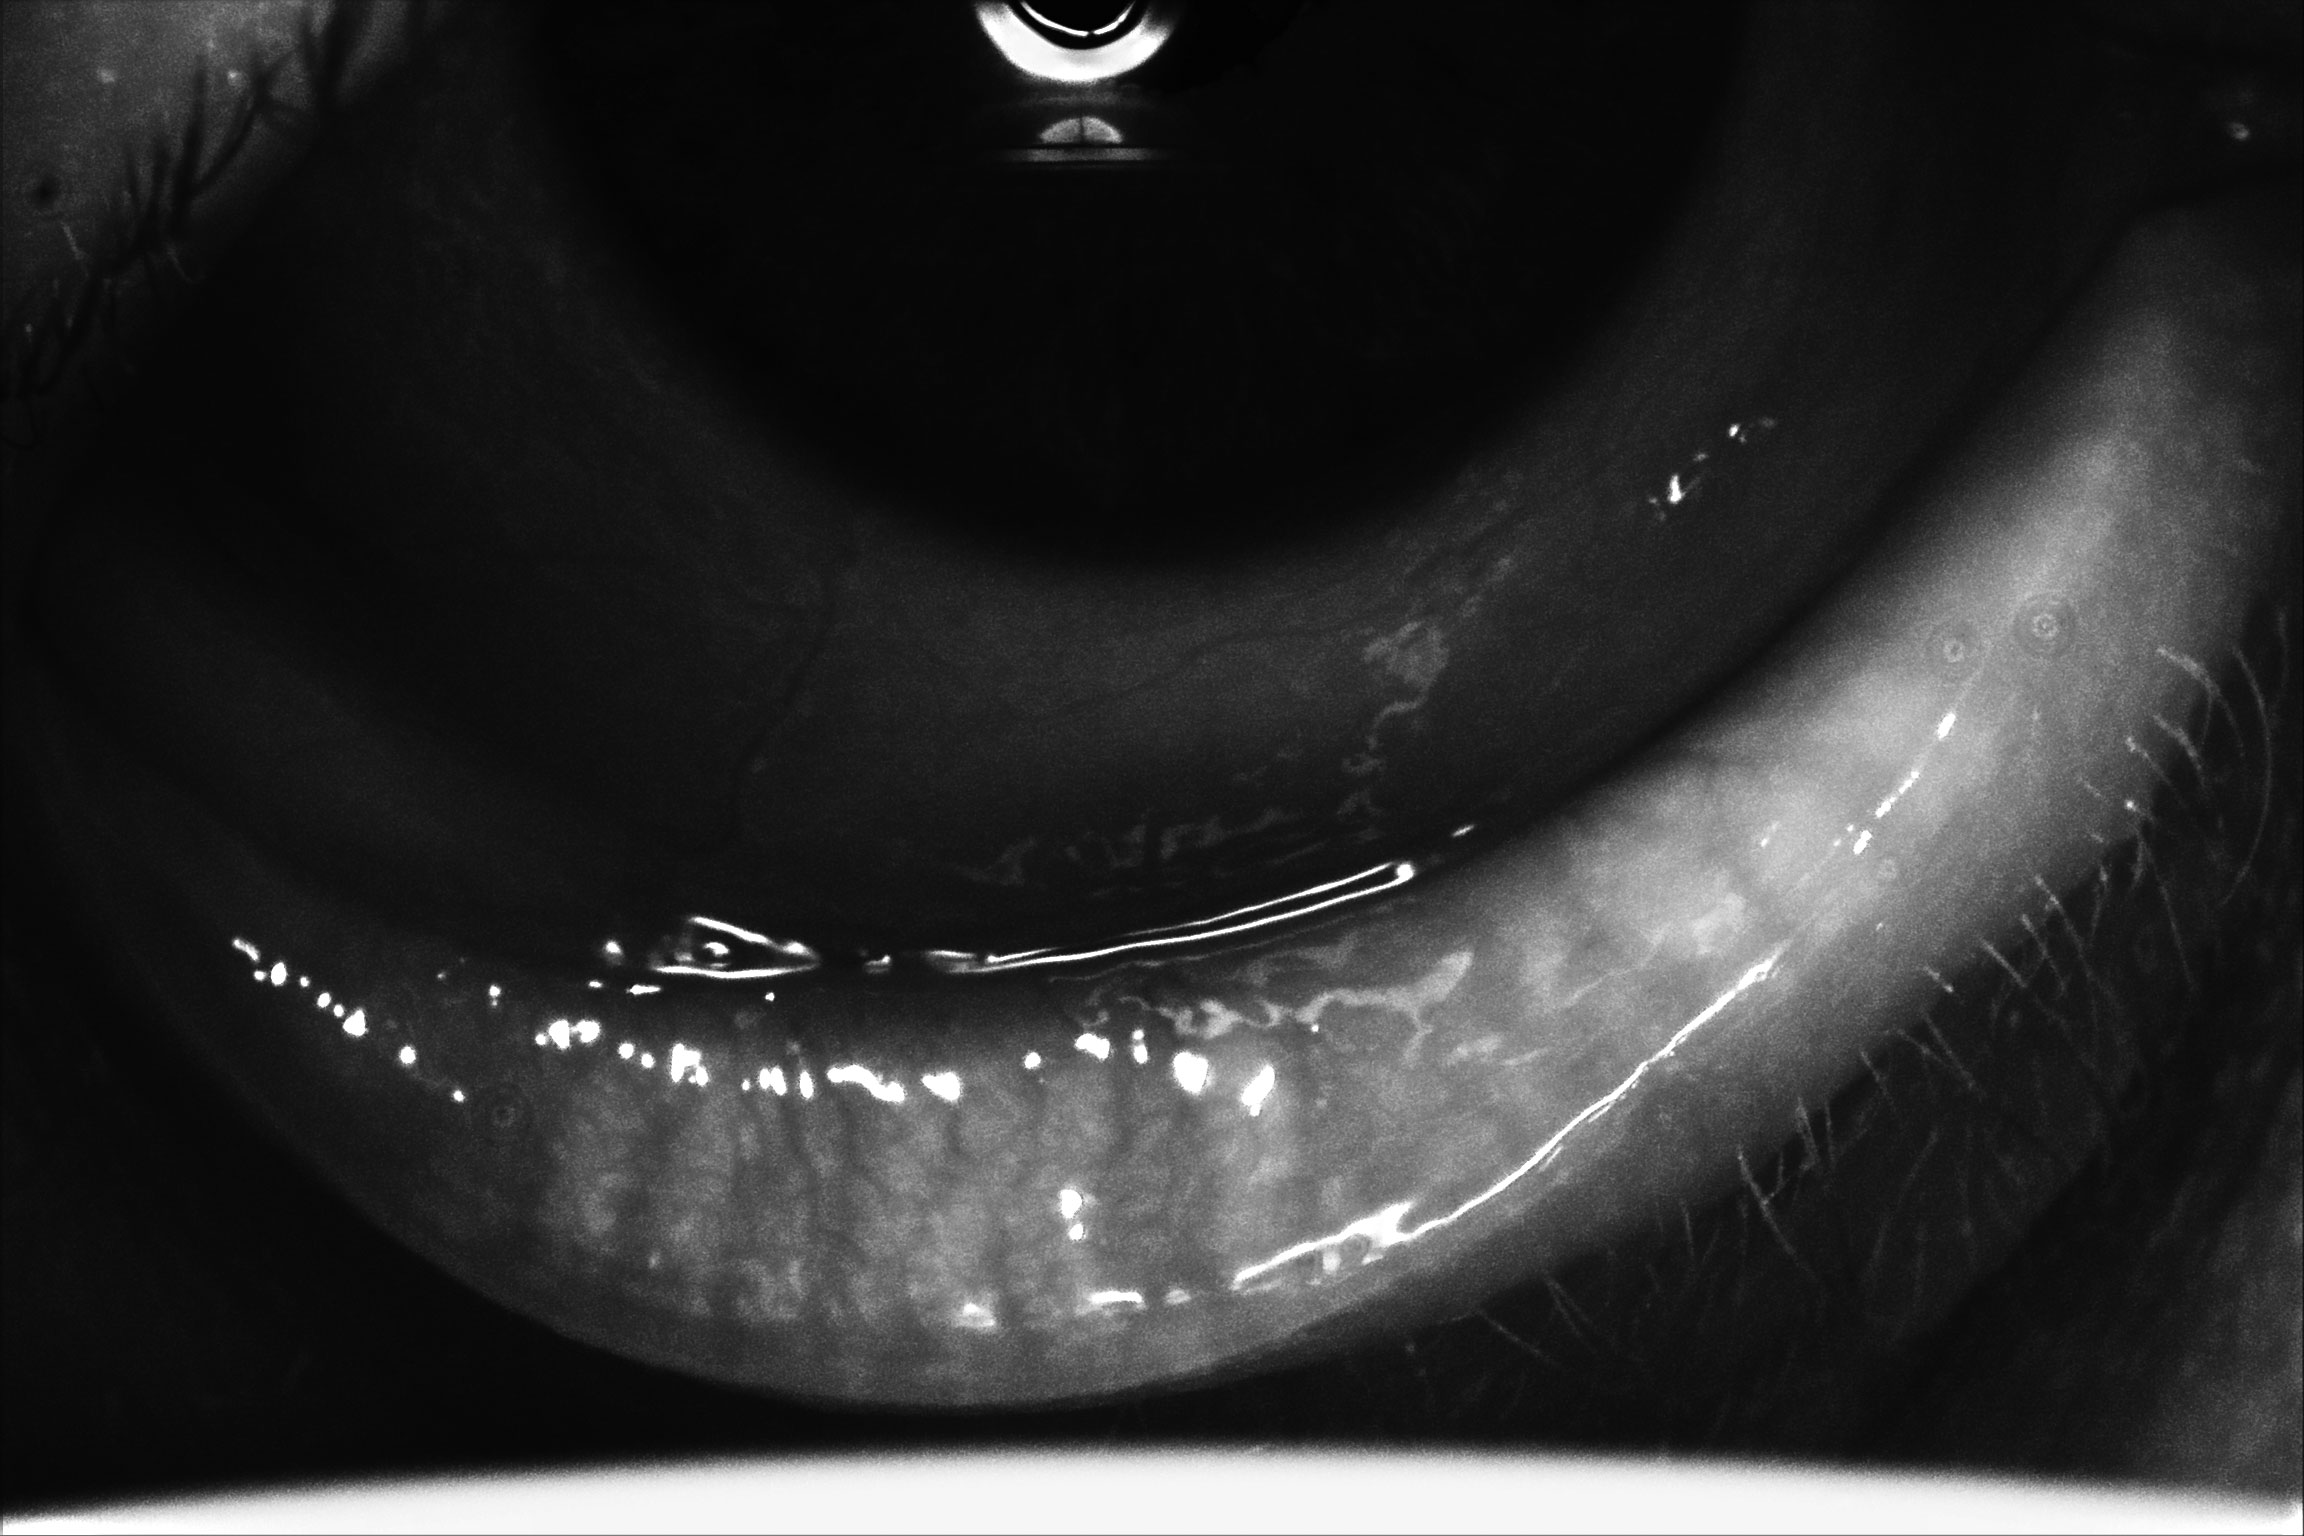 Meibography of a patient with severe dry eye disease. Note they have moderate atrophy of the glands with moderate truncation and loss of gland structure, OS greater than OD.